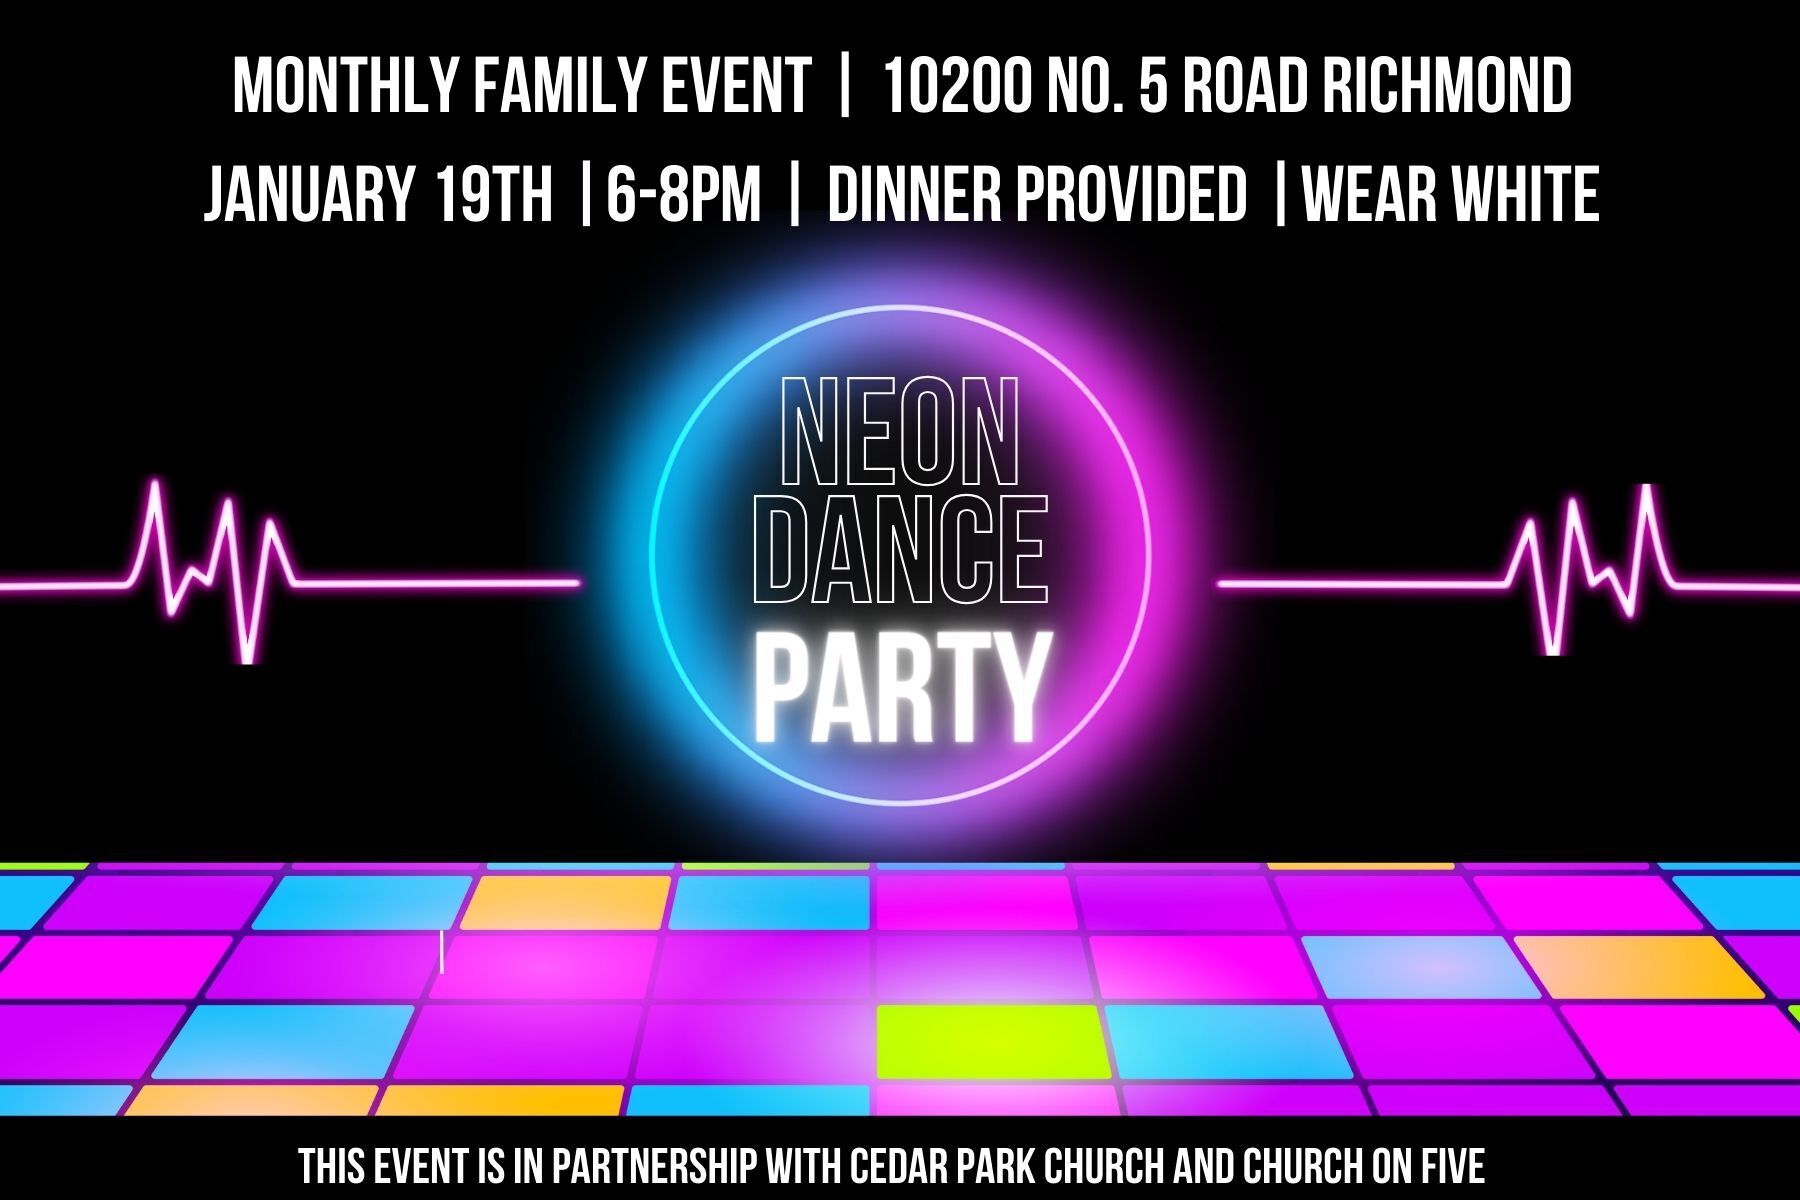 An image advertising a family friendly dance party event